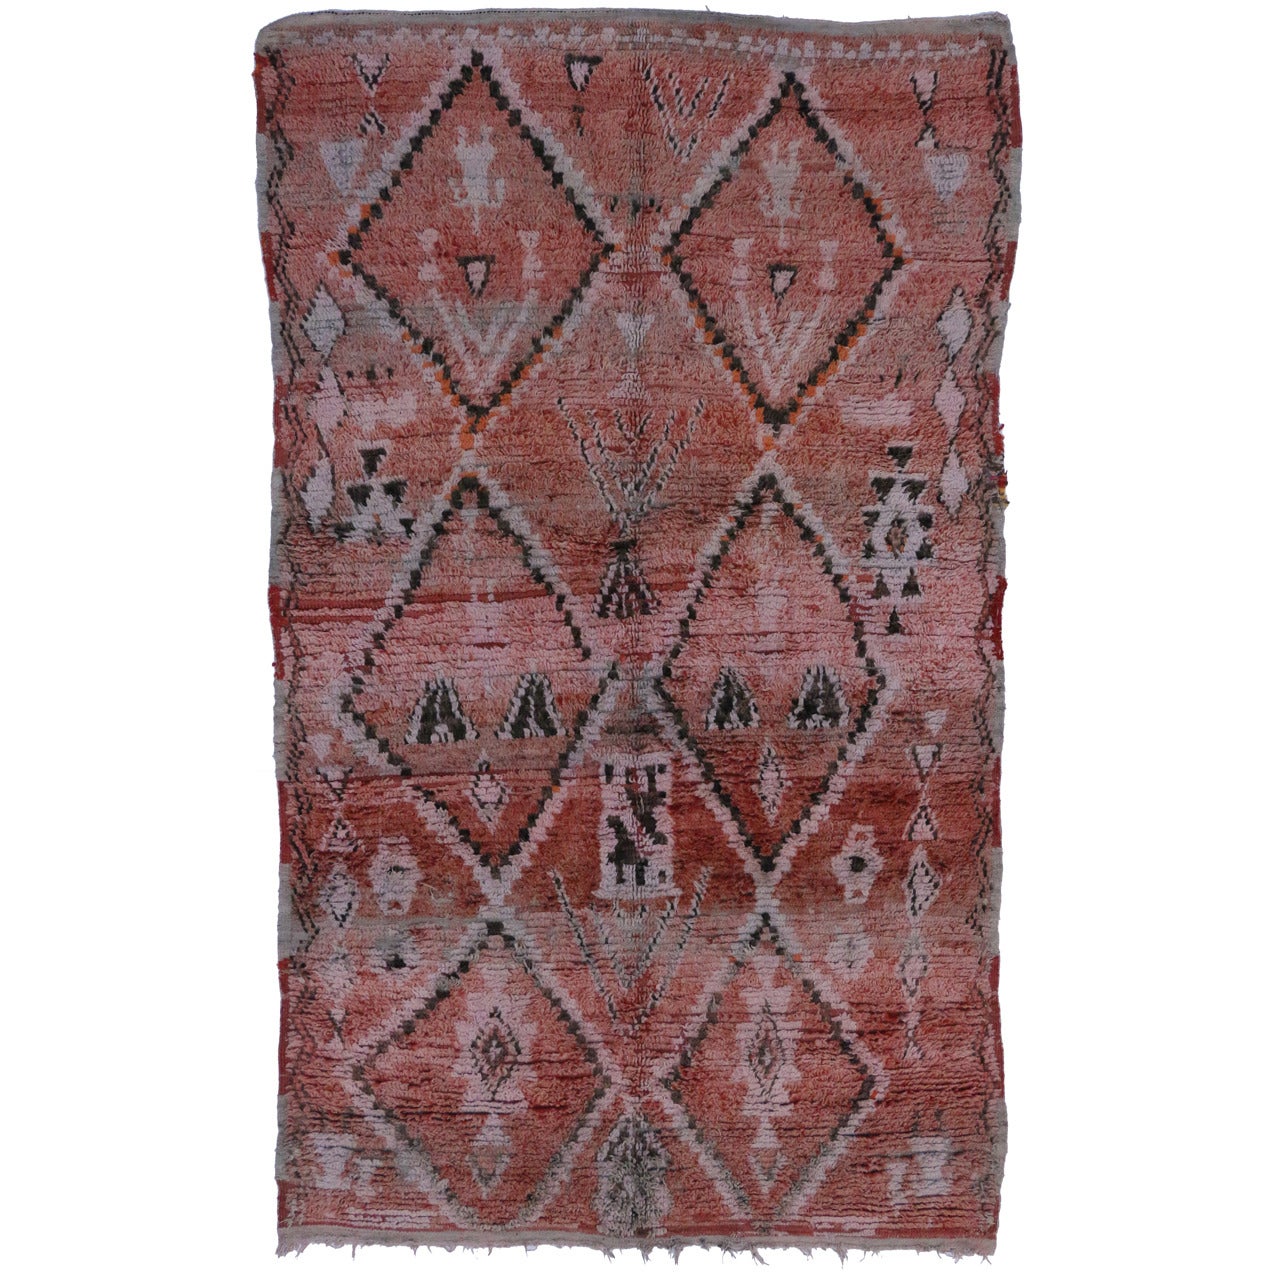 Berber Moroccan Rug with Tribal Design with Mid-Century Modern Style